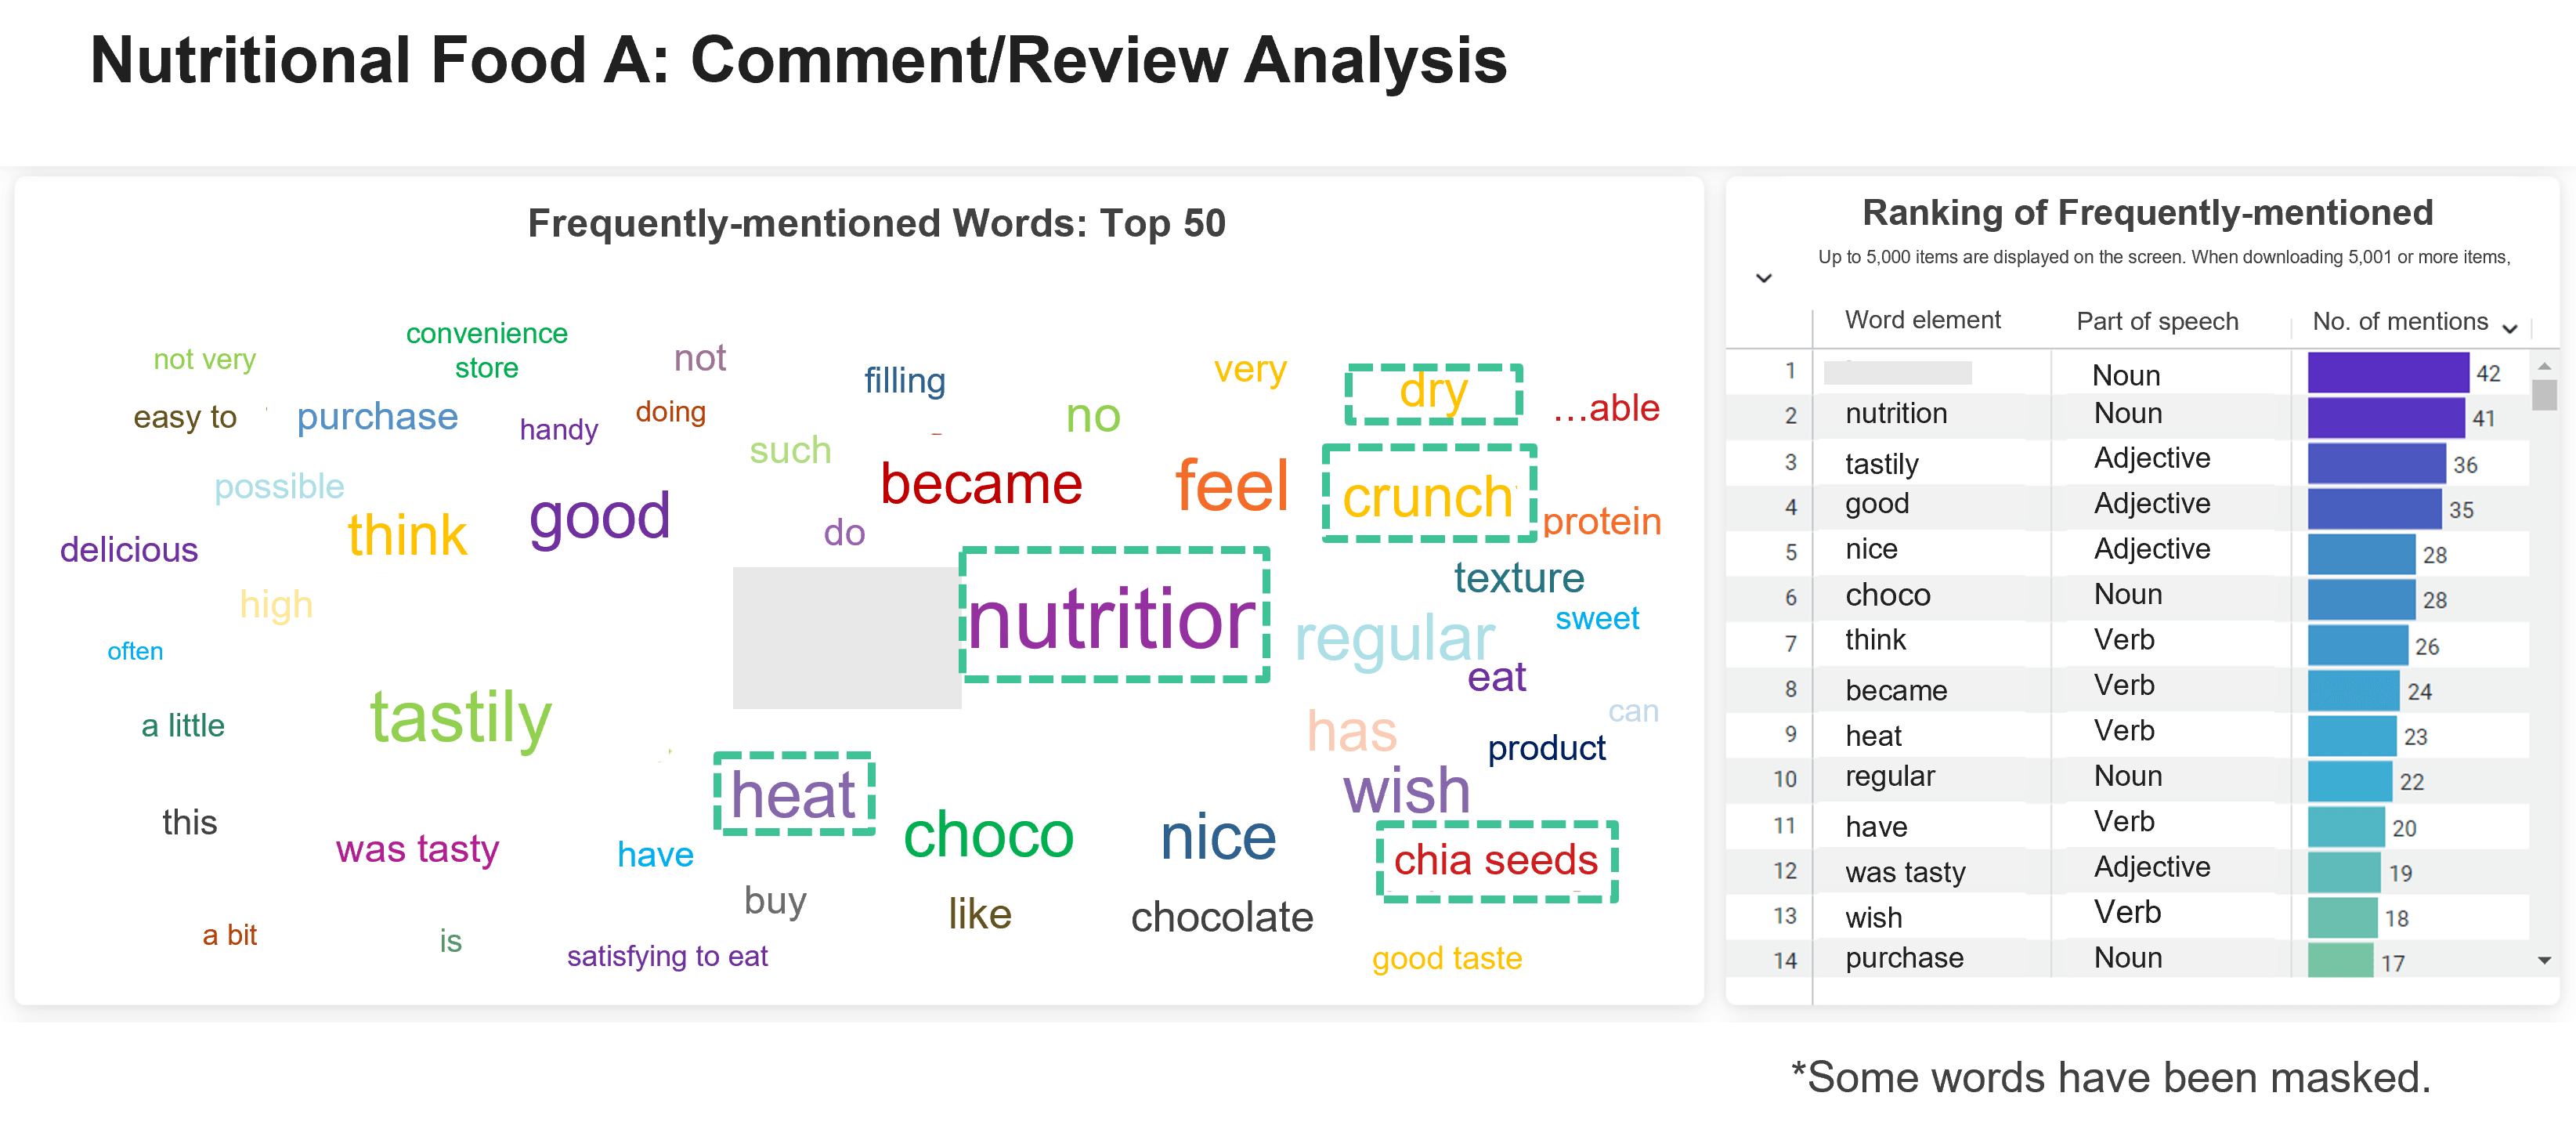 Nutritional Food A: Comment/Review Analysis